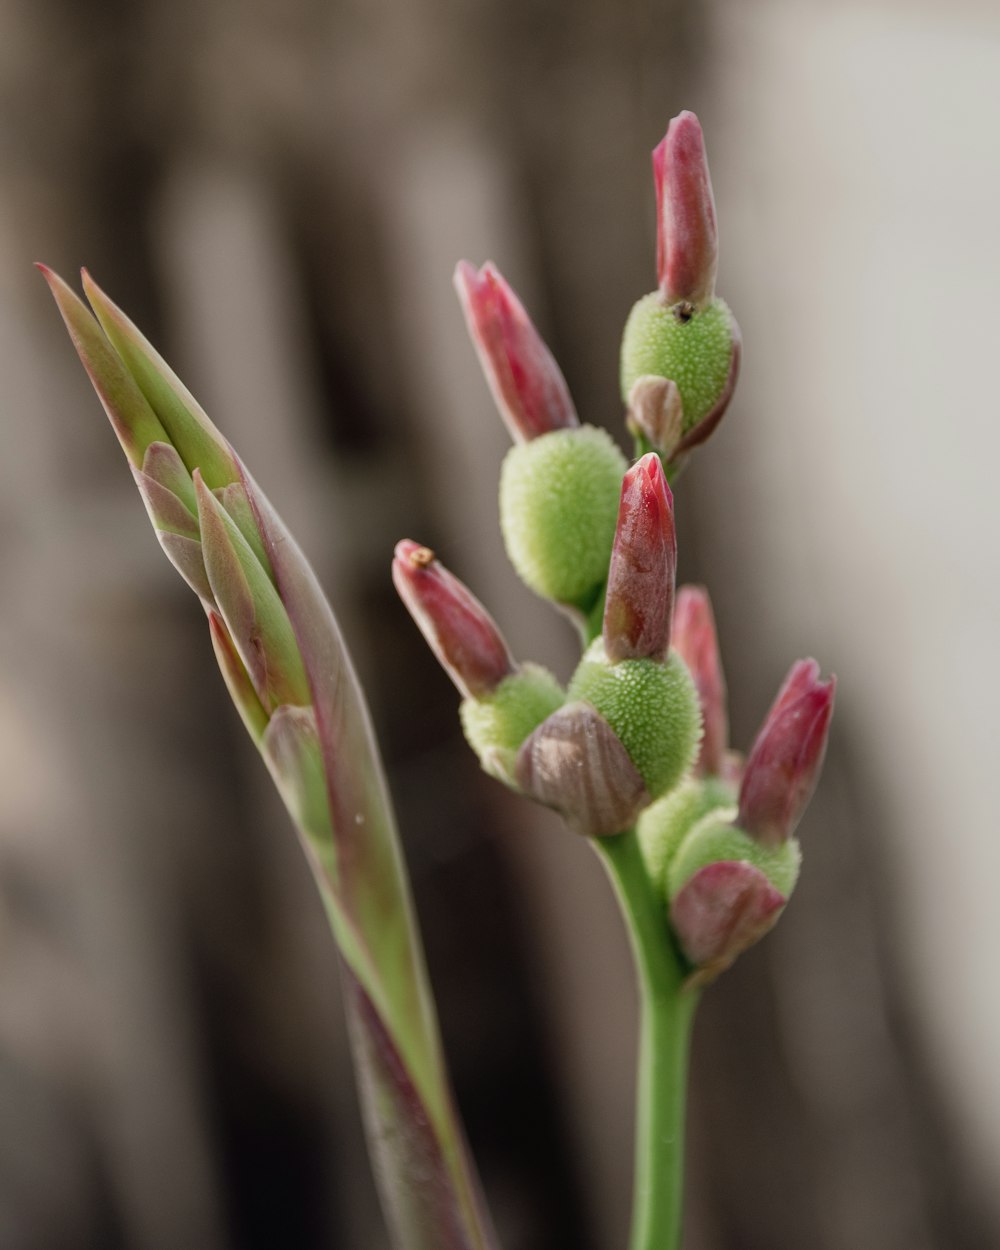 a close up of a flower bud with a blurry background